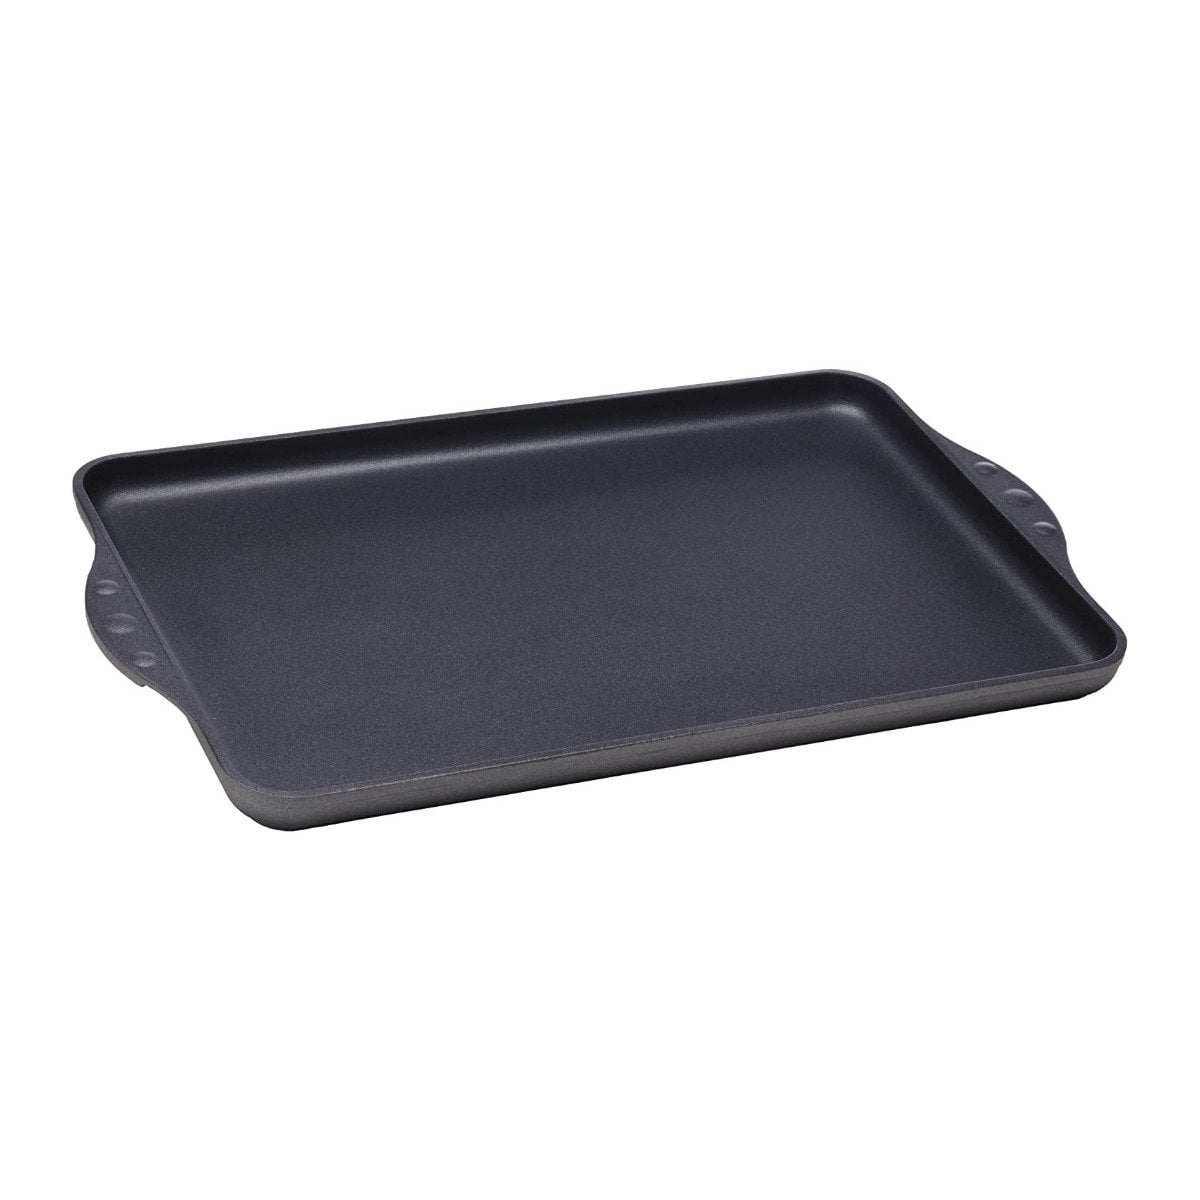 Alpine Cuisine Aluminum Double Griddle Pan 11x19in with Silicone Handl